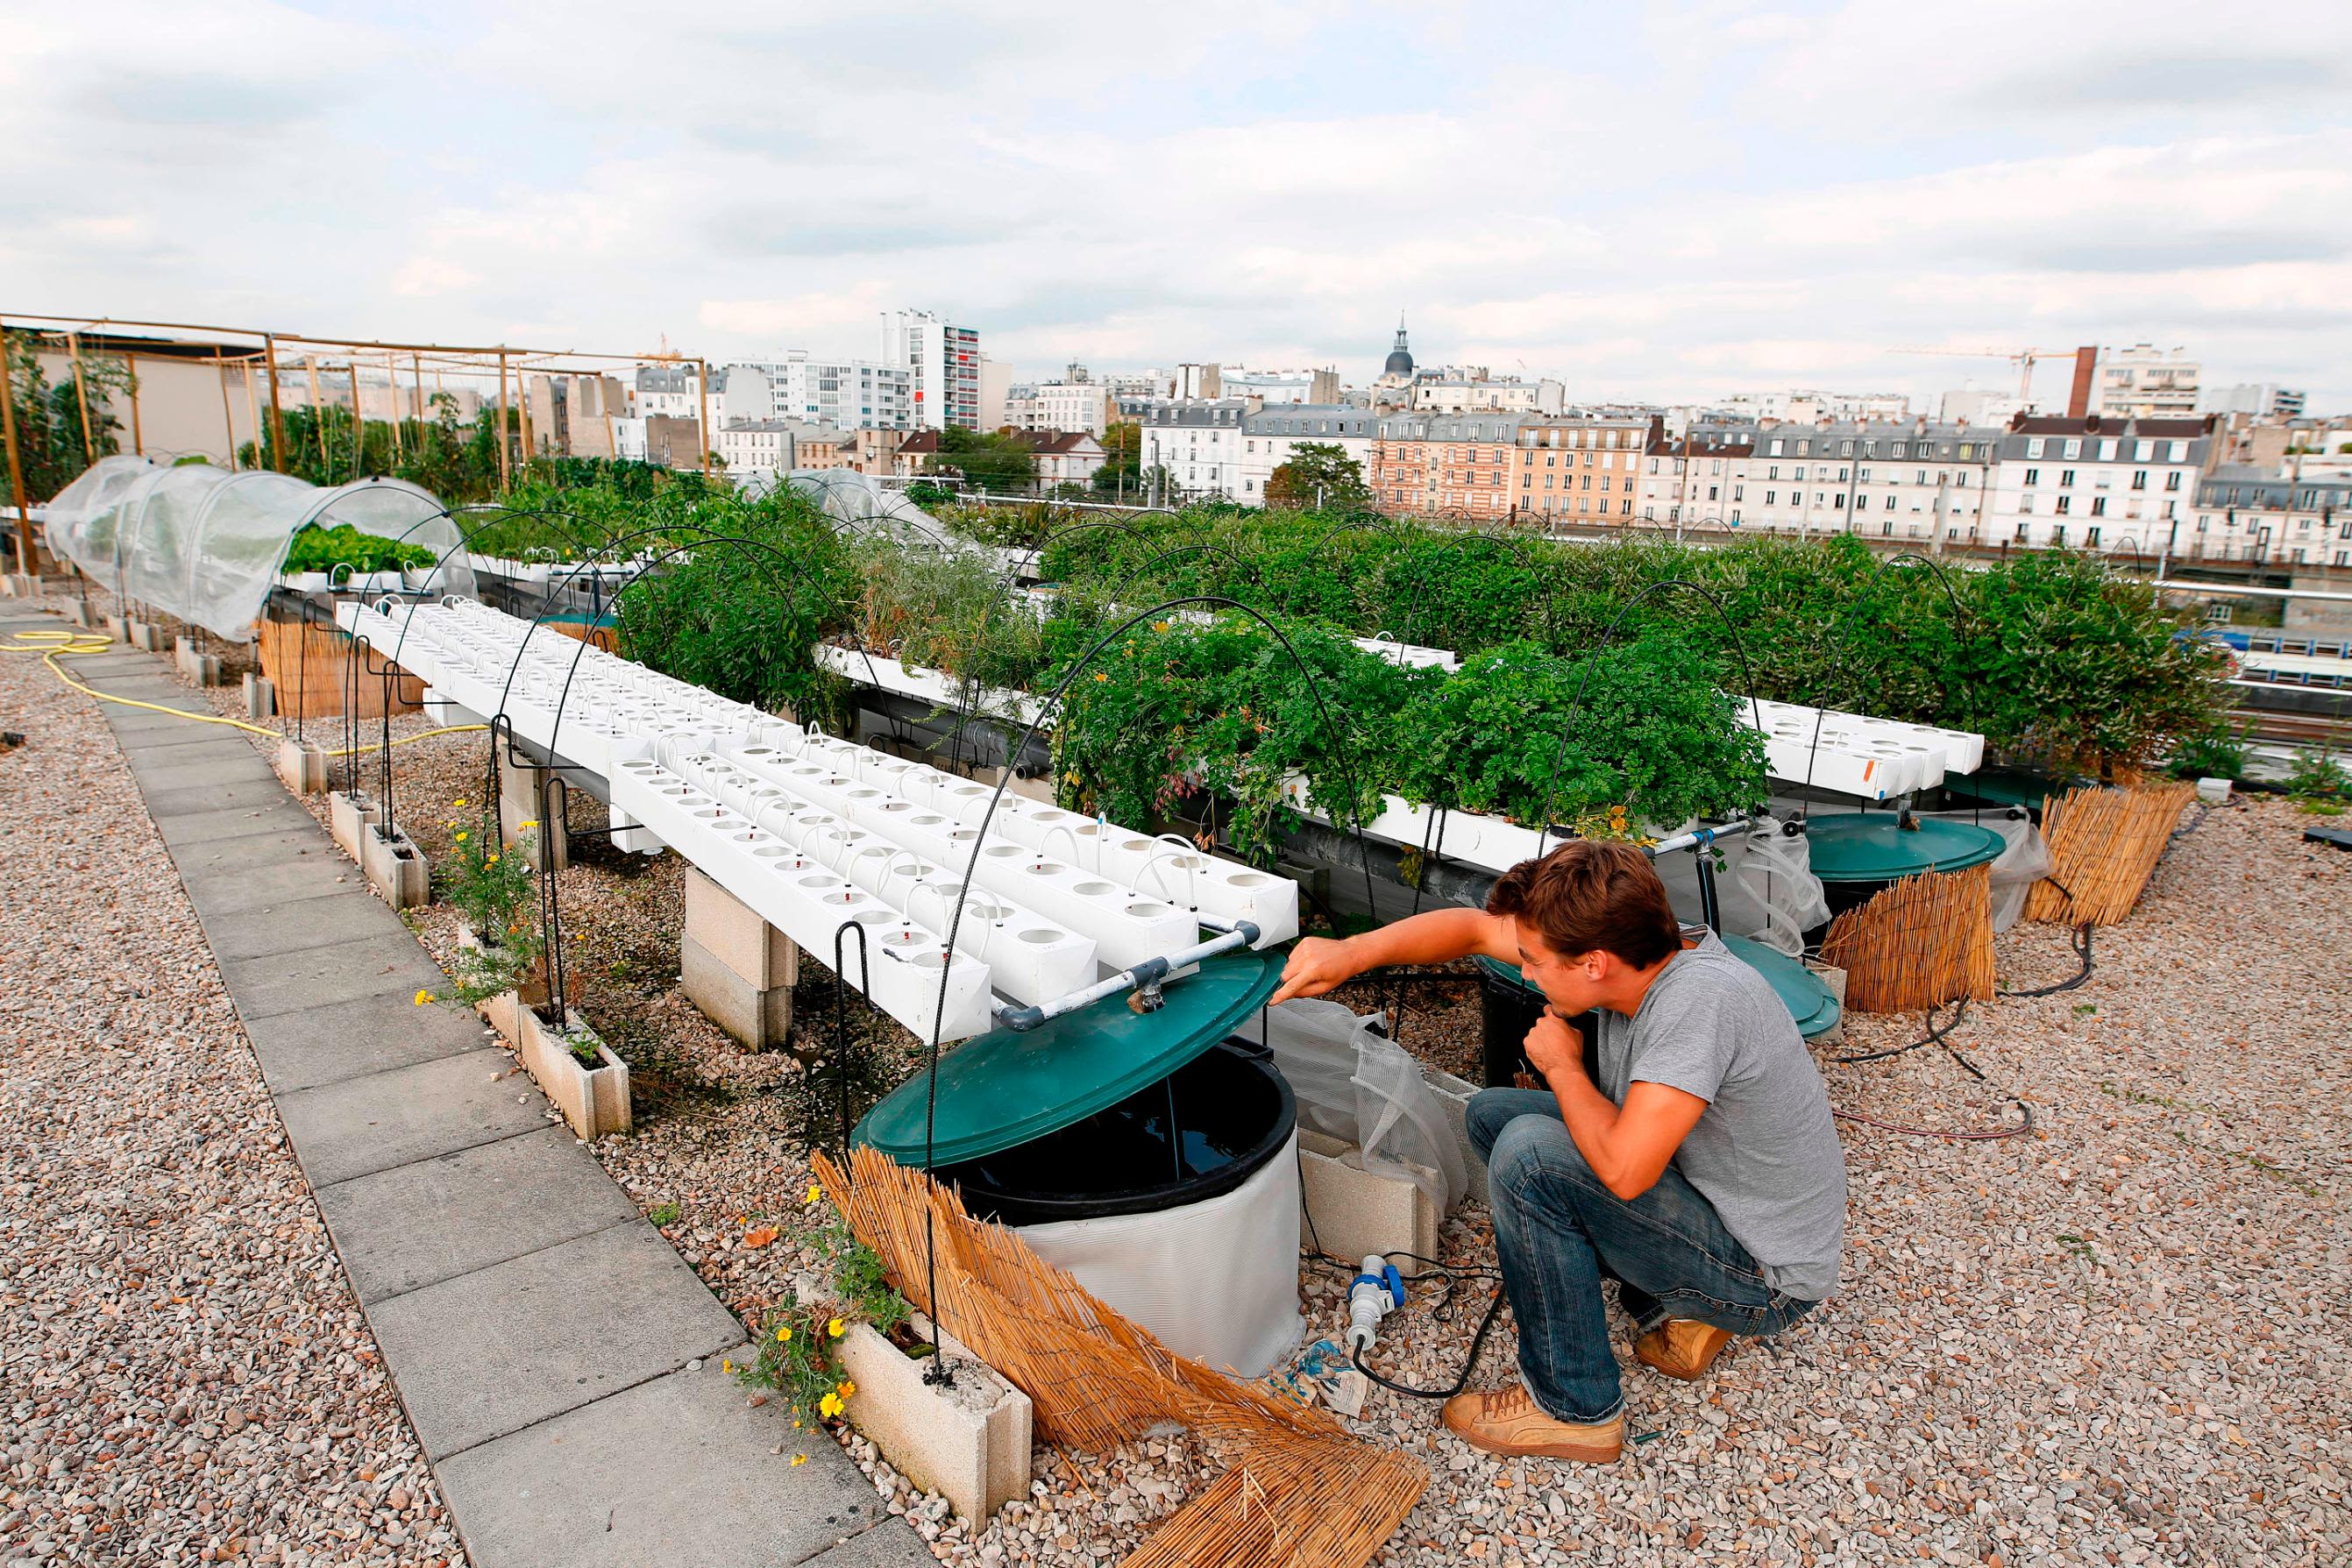 This rooftop garden in Paris could be the future of food production